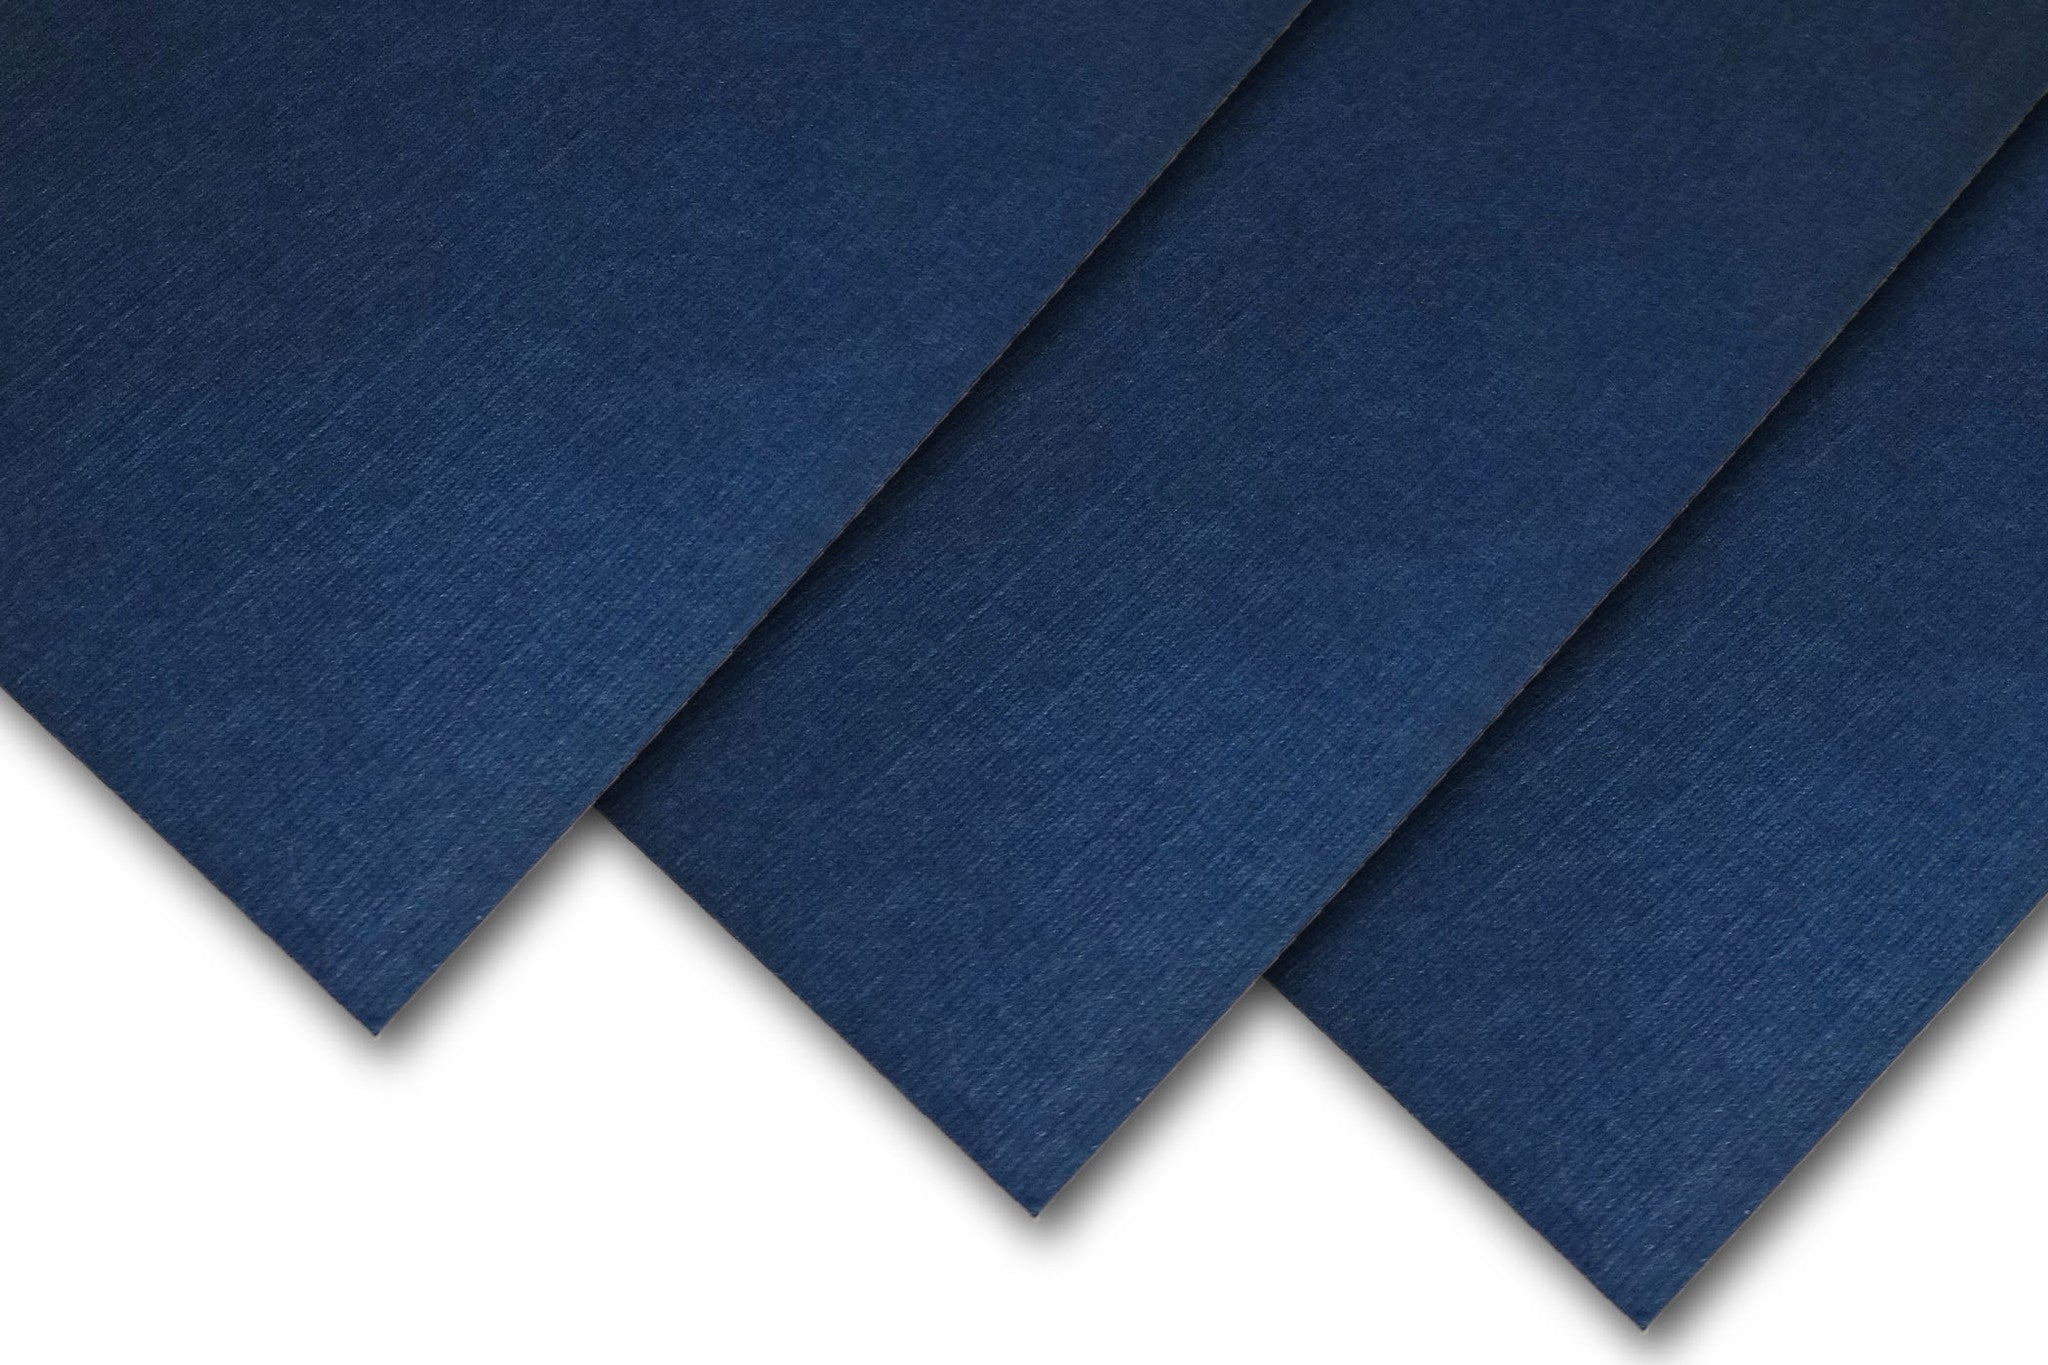  50Sheets Navy Blue Cardstock Paper, 8.5 x 11 Card